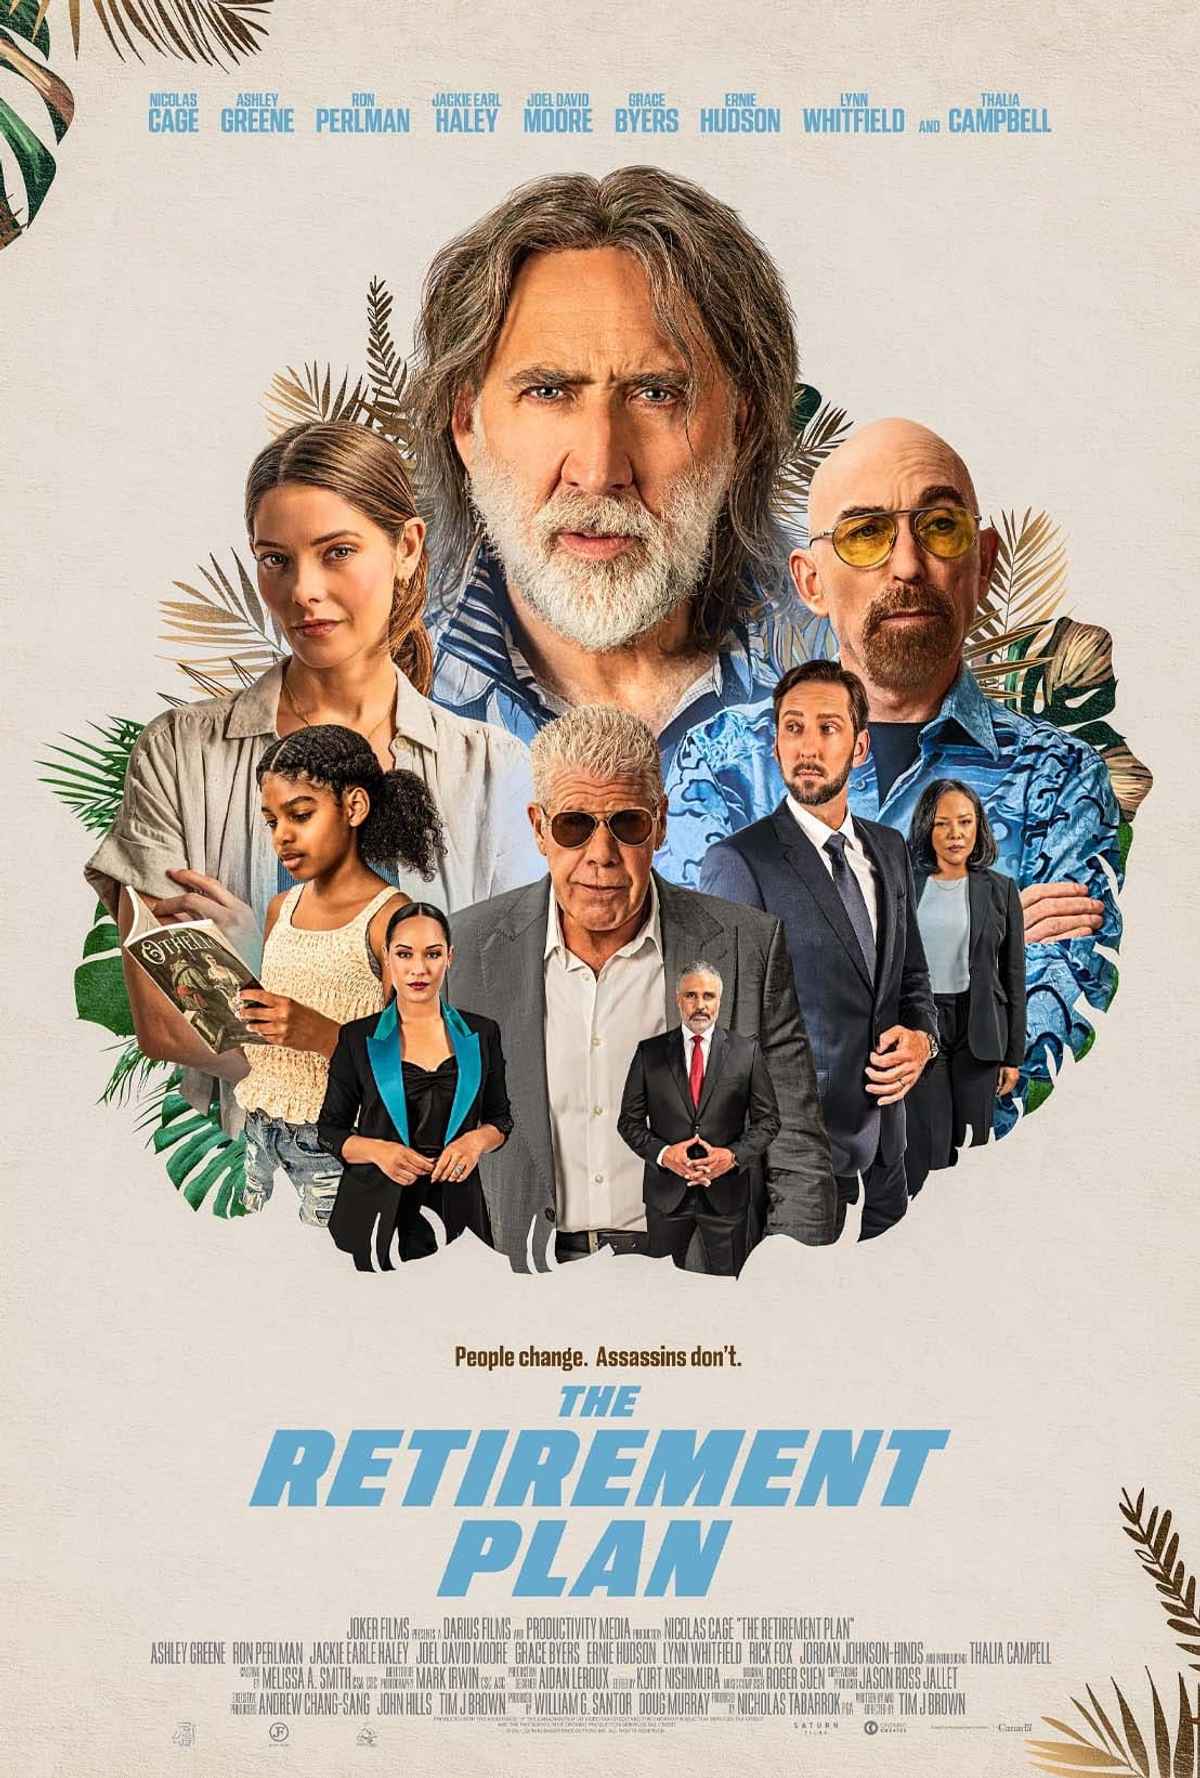 The Retirement Plan Movie (2022) | Release Date, Cast, Trailer, Songs